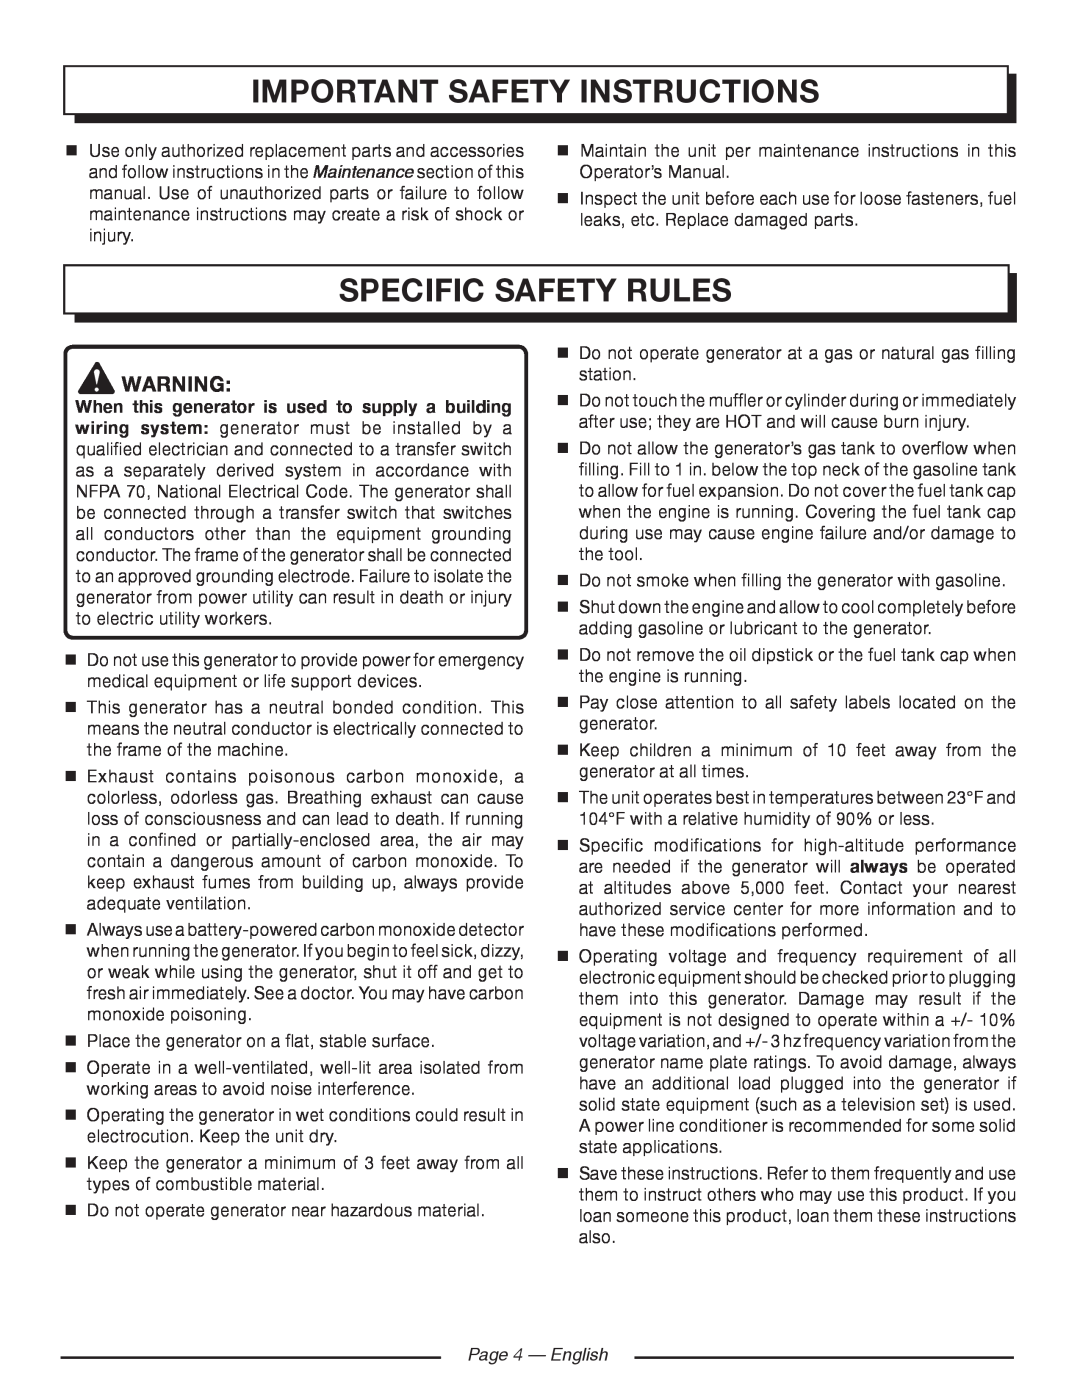 Homelite HGCA5700 manuel dutilisation Specific Safety Rules, Page 4 — English, important safety instructions 